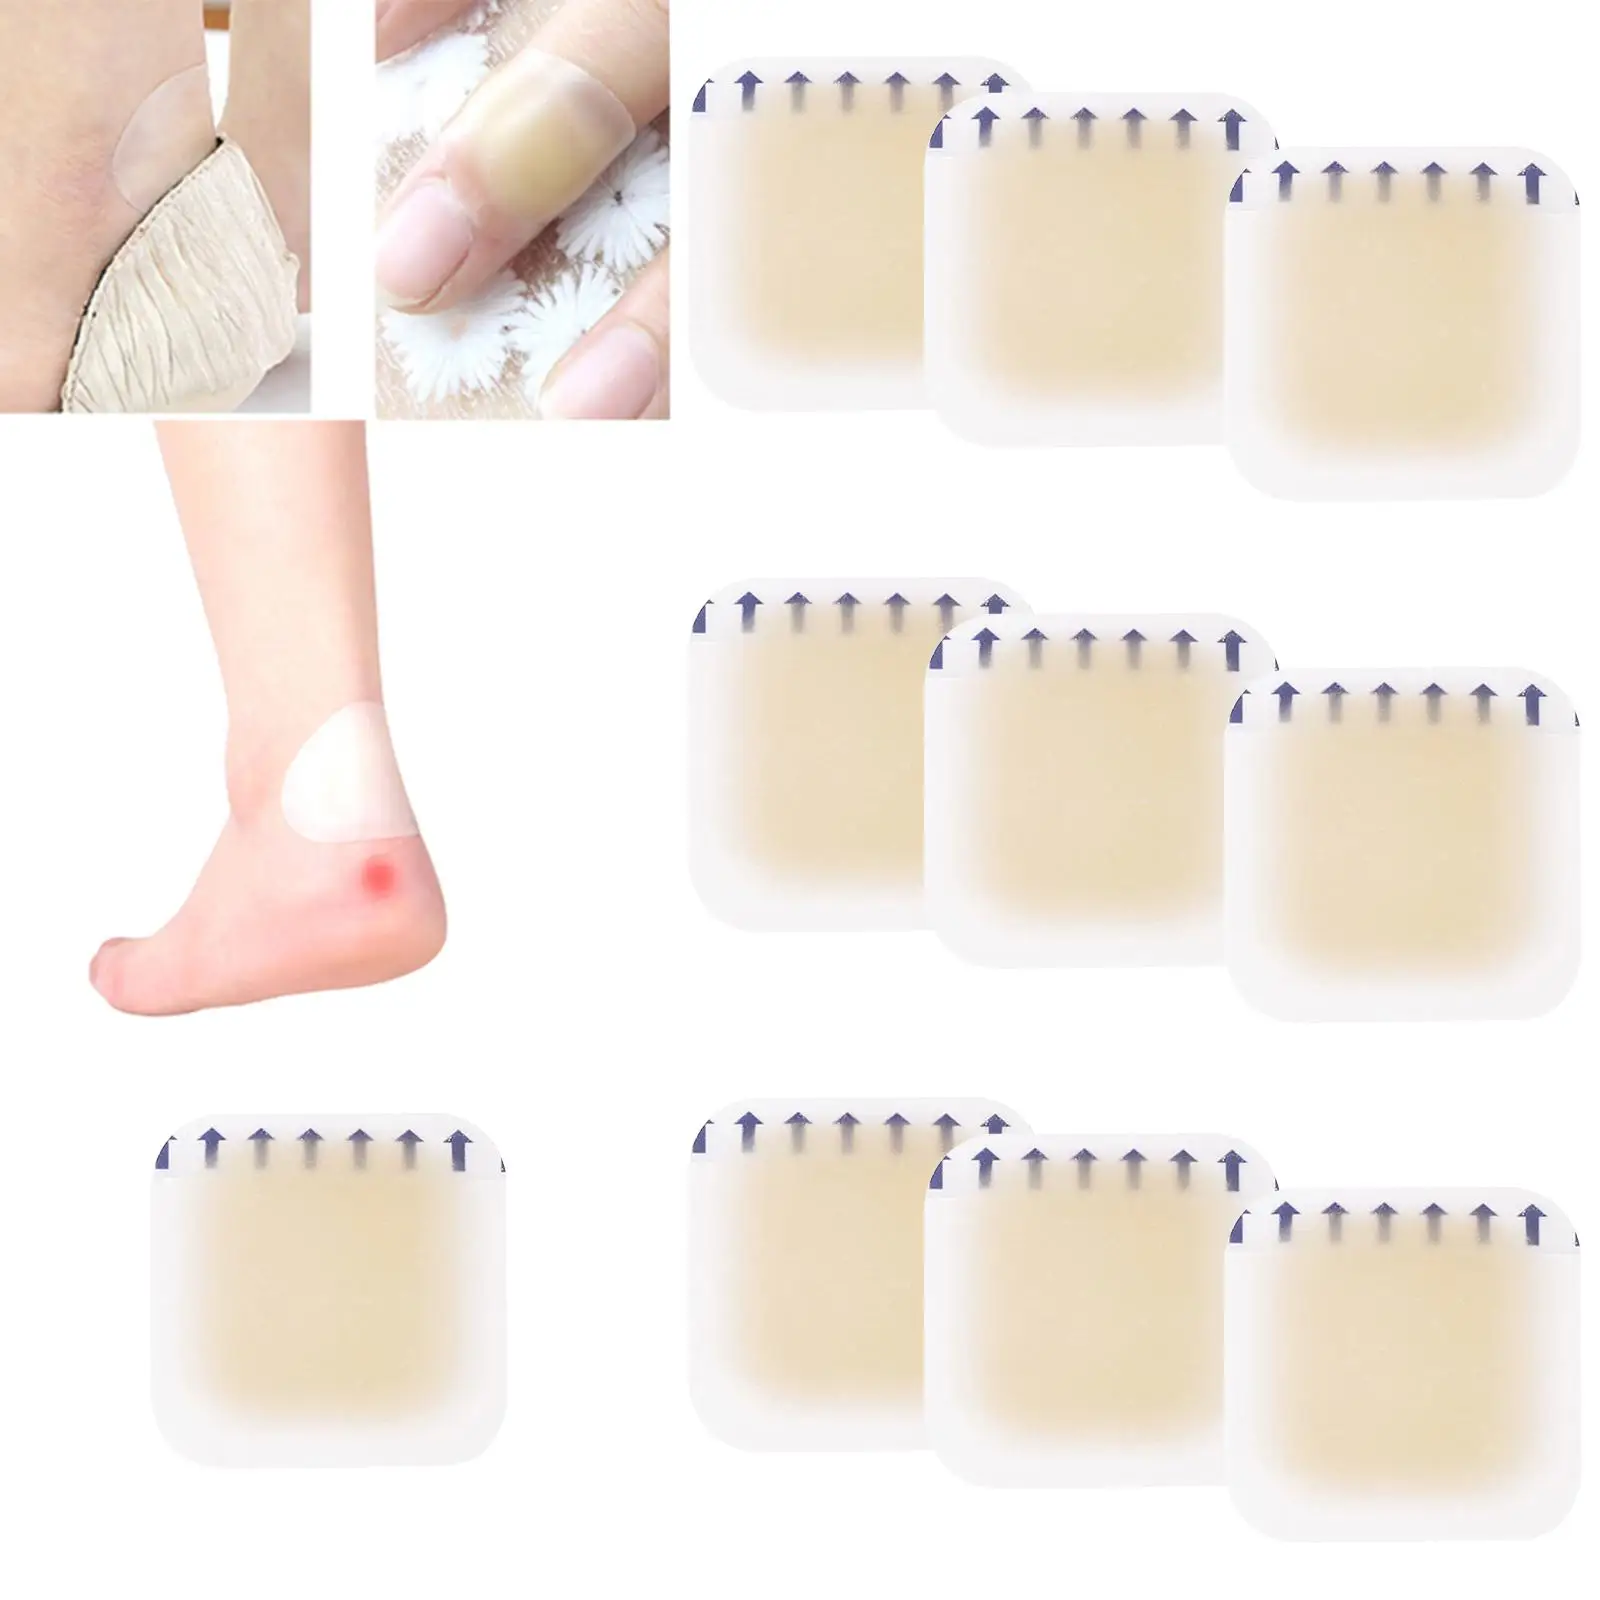 10Pcs Gel Shoes Stickers, Patch Heel Pad Protection heel Soft Hydrocolloid Pads Foot Care for Sports Shoes High Heels